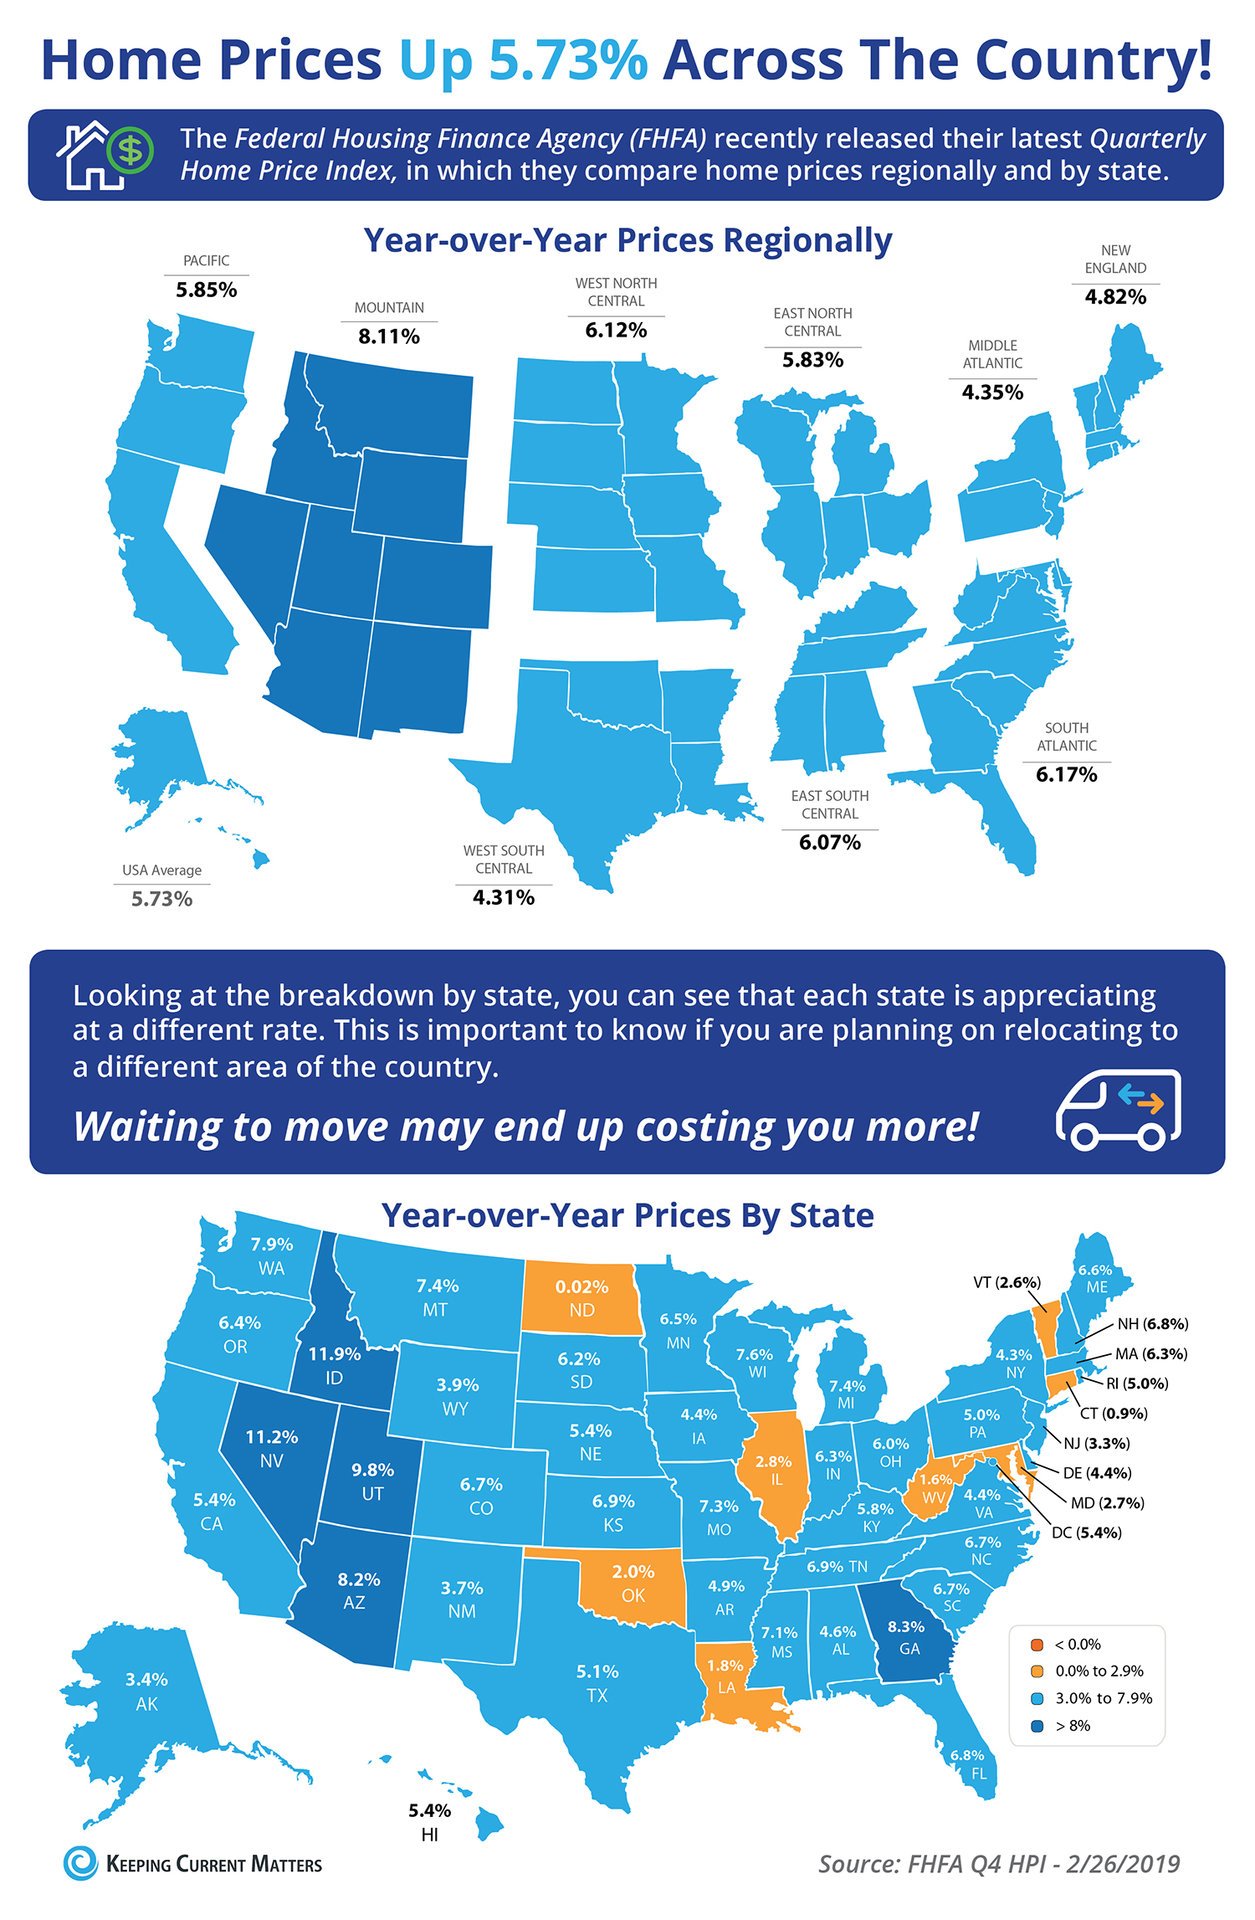 Home Prices Up 5.73% Across the Country! [INFOGRAPHIC] | Keeping Current Matters